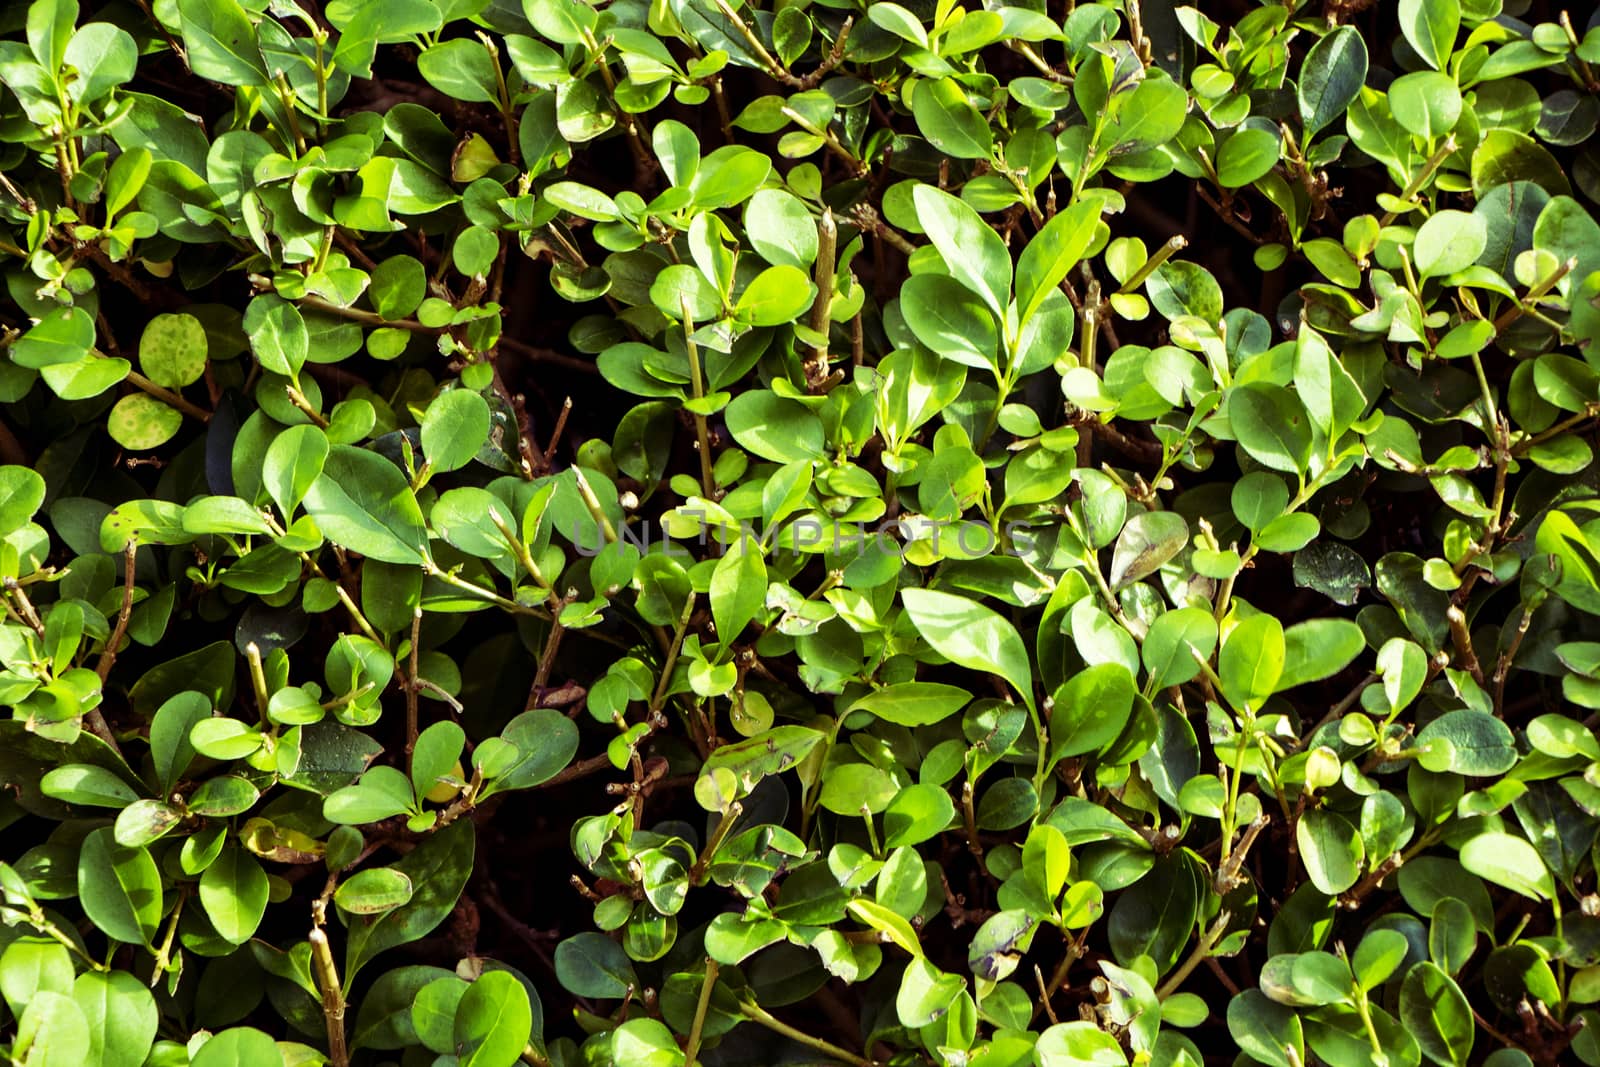 Green hedge leaves and branches in sunlight.